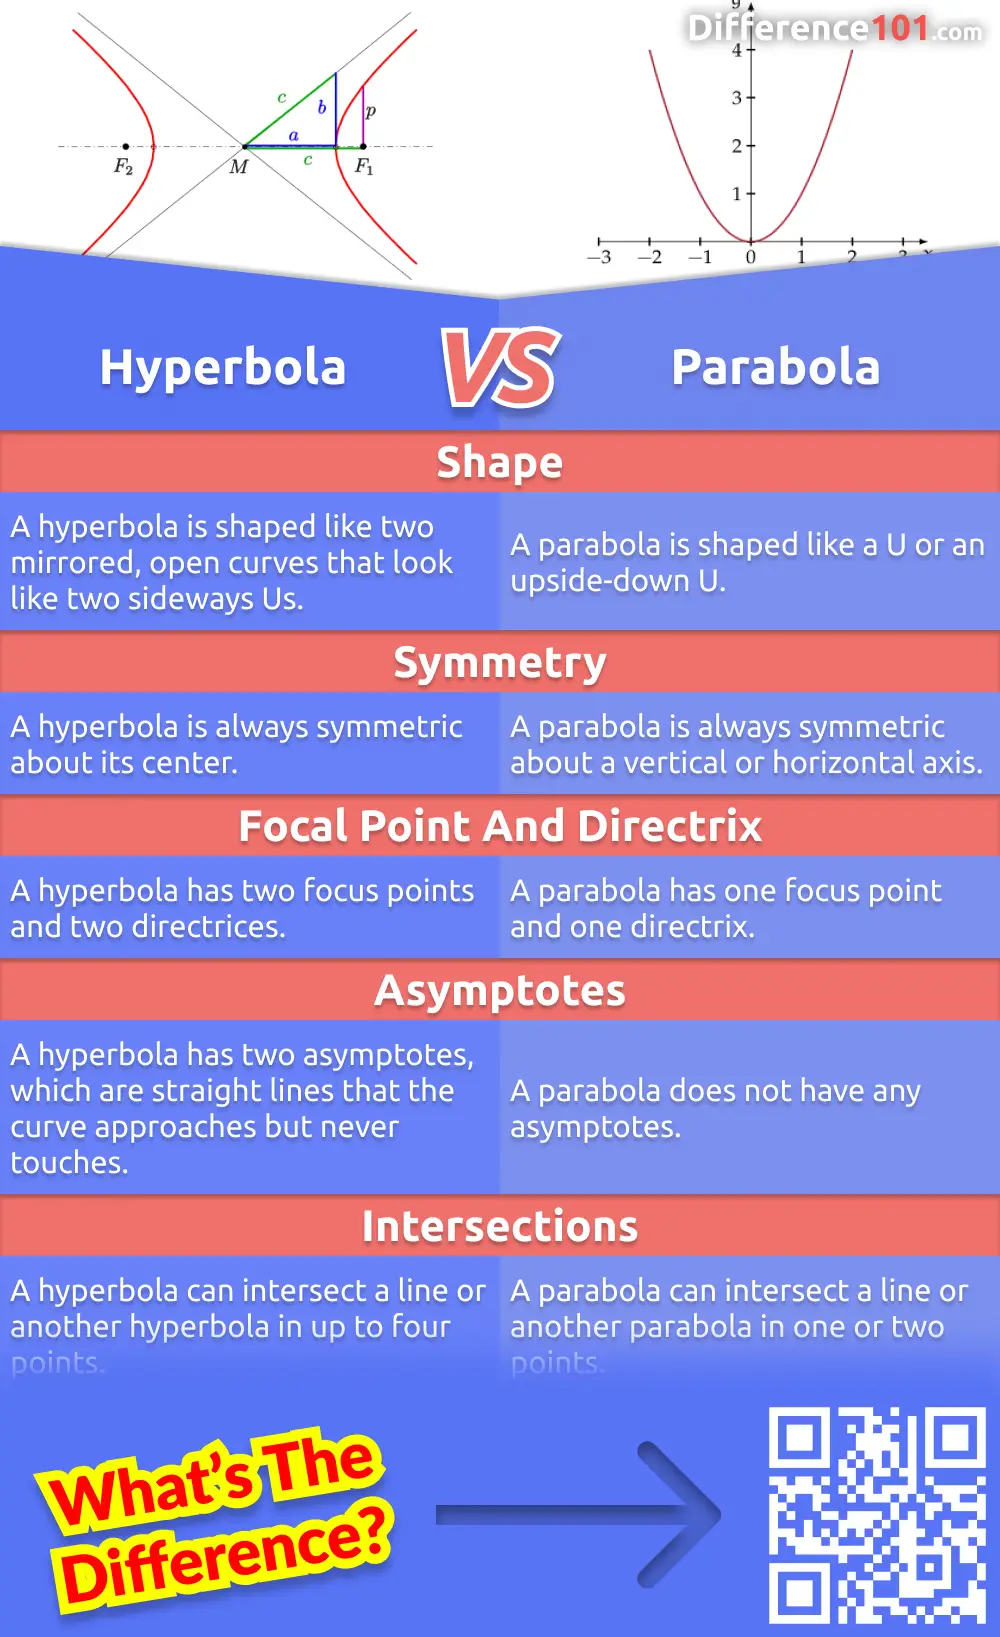 Hyperbolas and parabolas are two types of conic sections that have important mathematical and physical applications. While they share some similarities, they have distinct differences. Read more here.